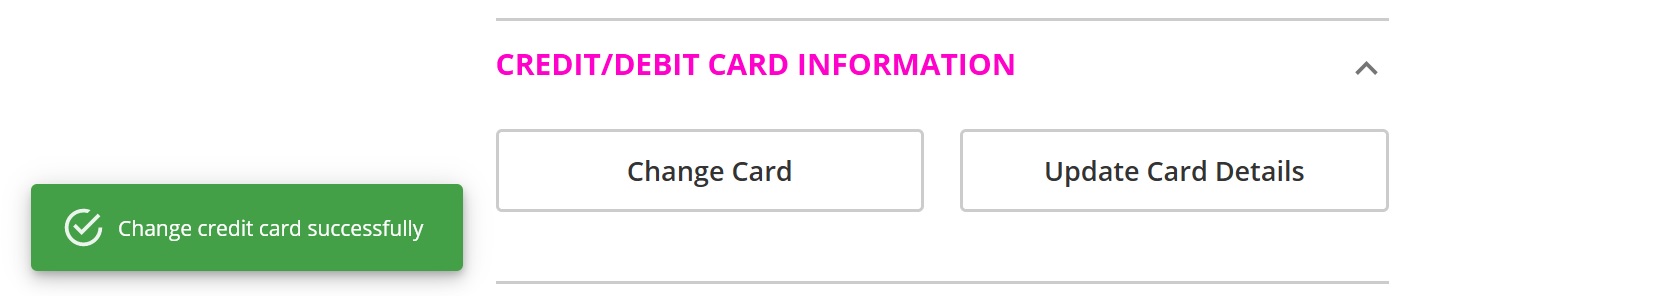 change_payment_card_02.jpg